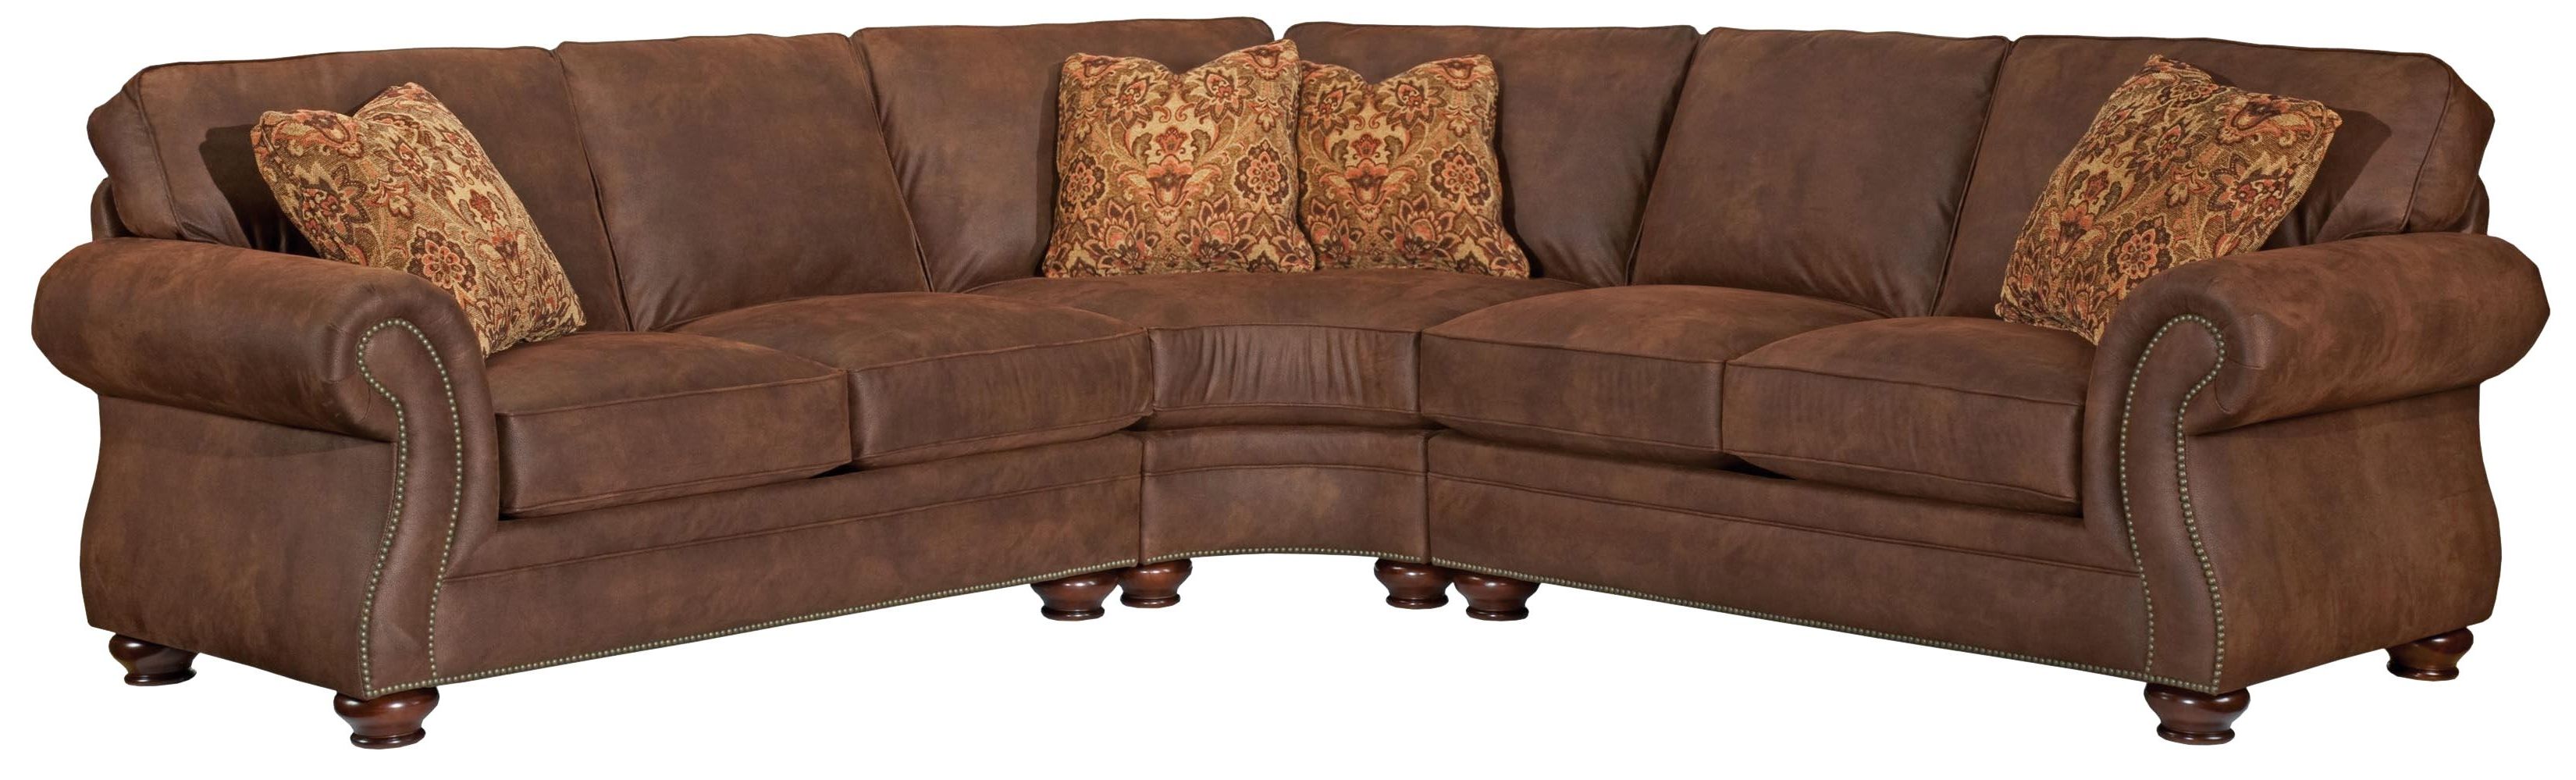 Featured Photo of The 15 Best Collection of Sectional Sofas at Broyhill